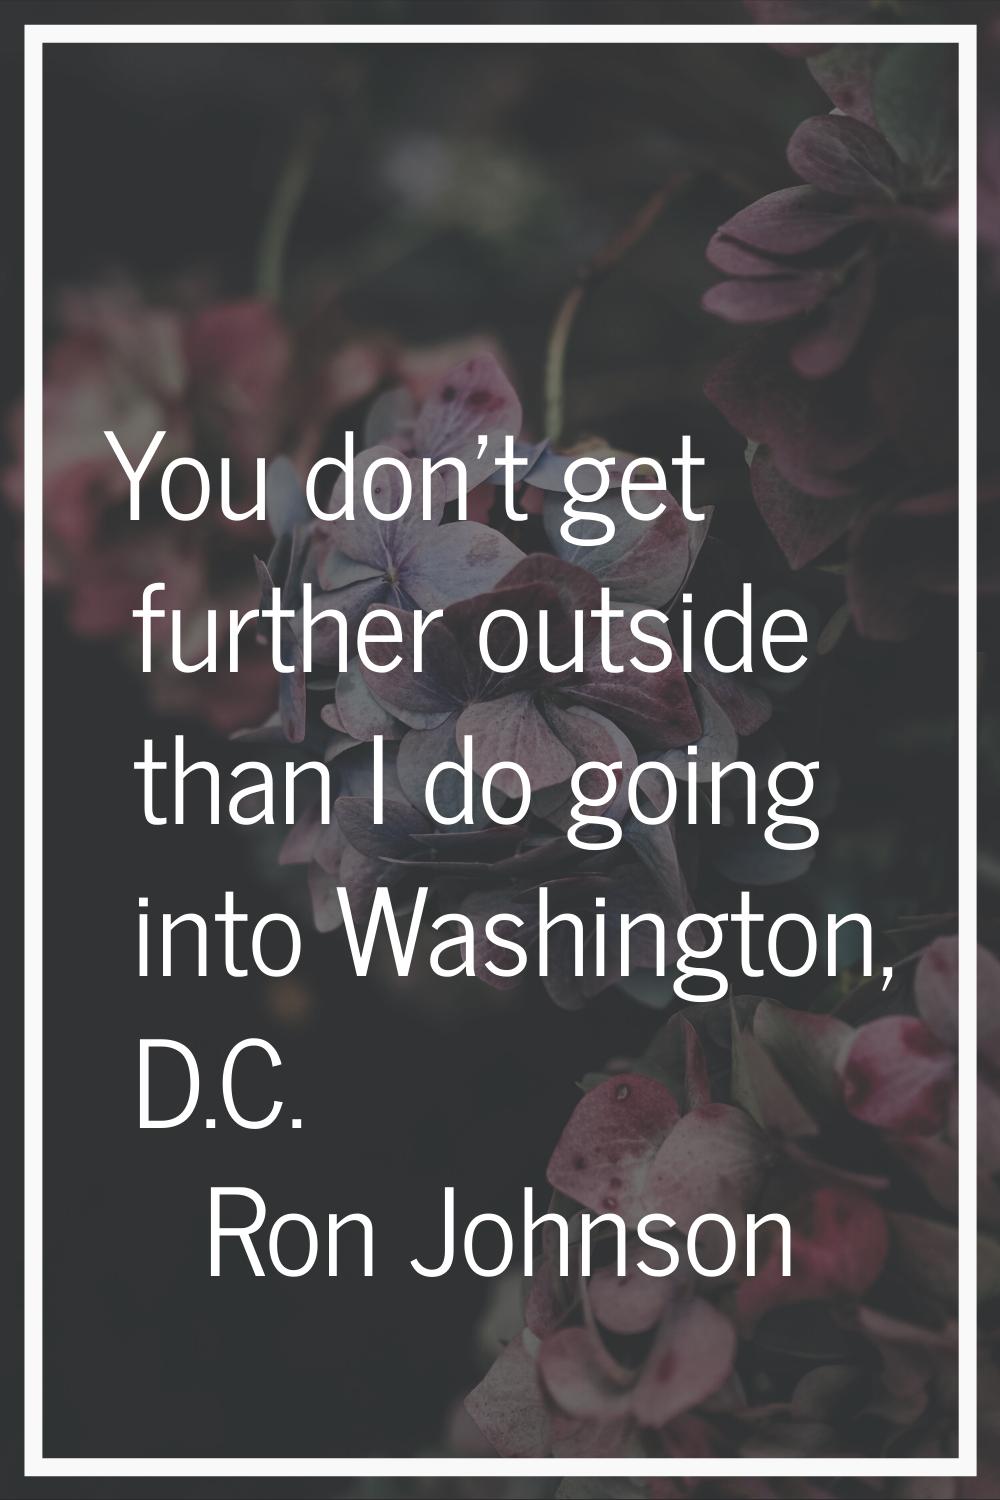 You don't get further outside than I do going into Washington, D.C.